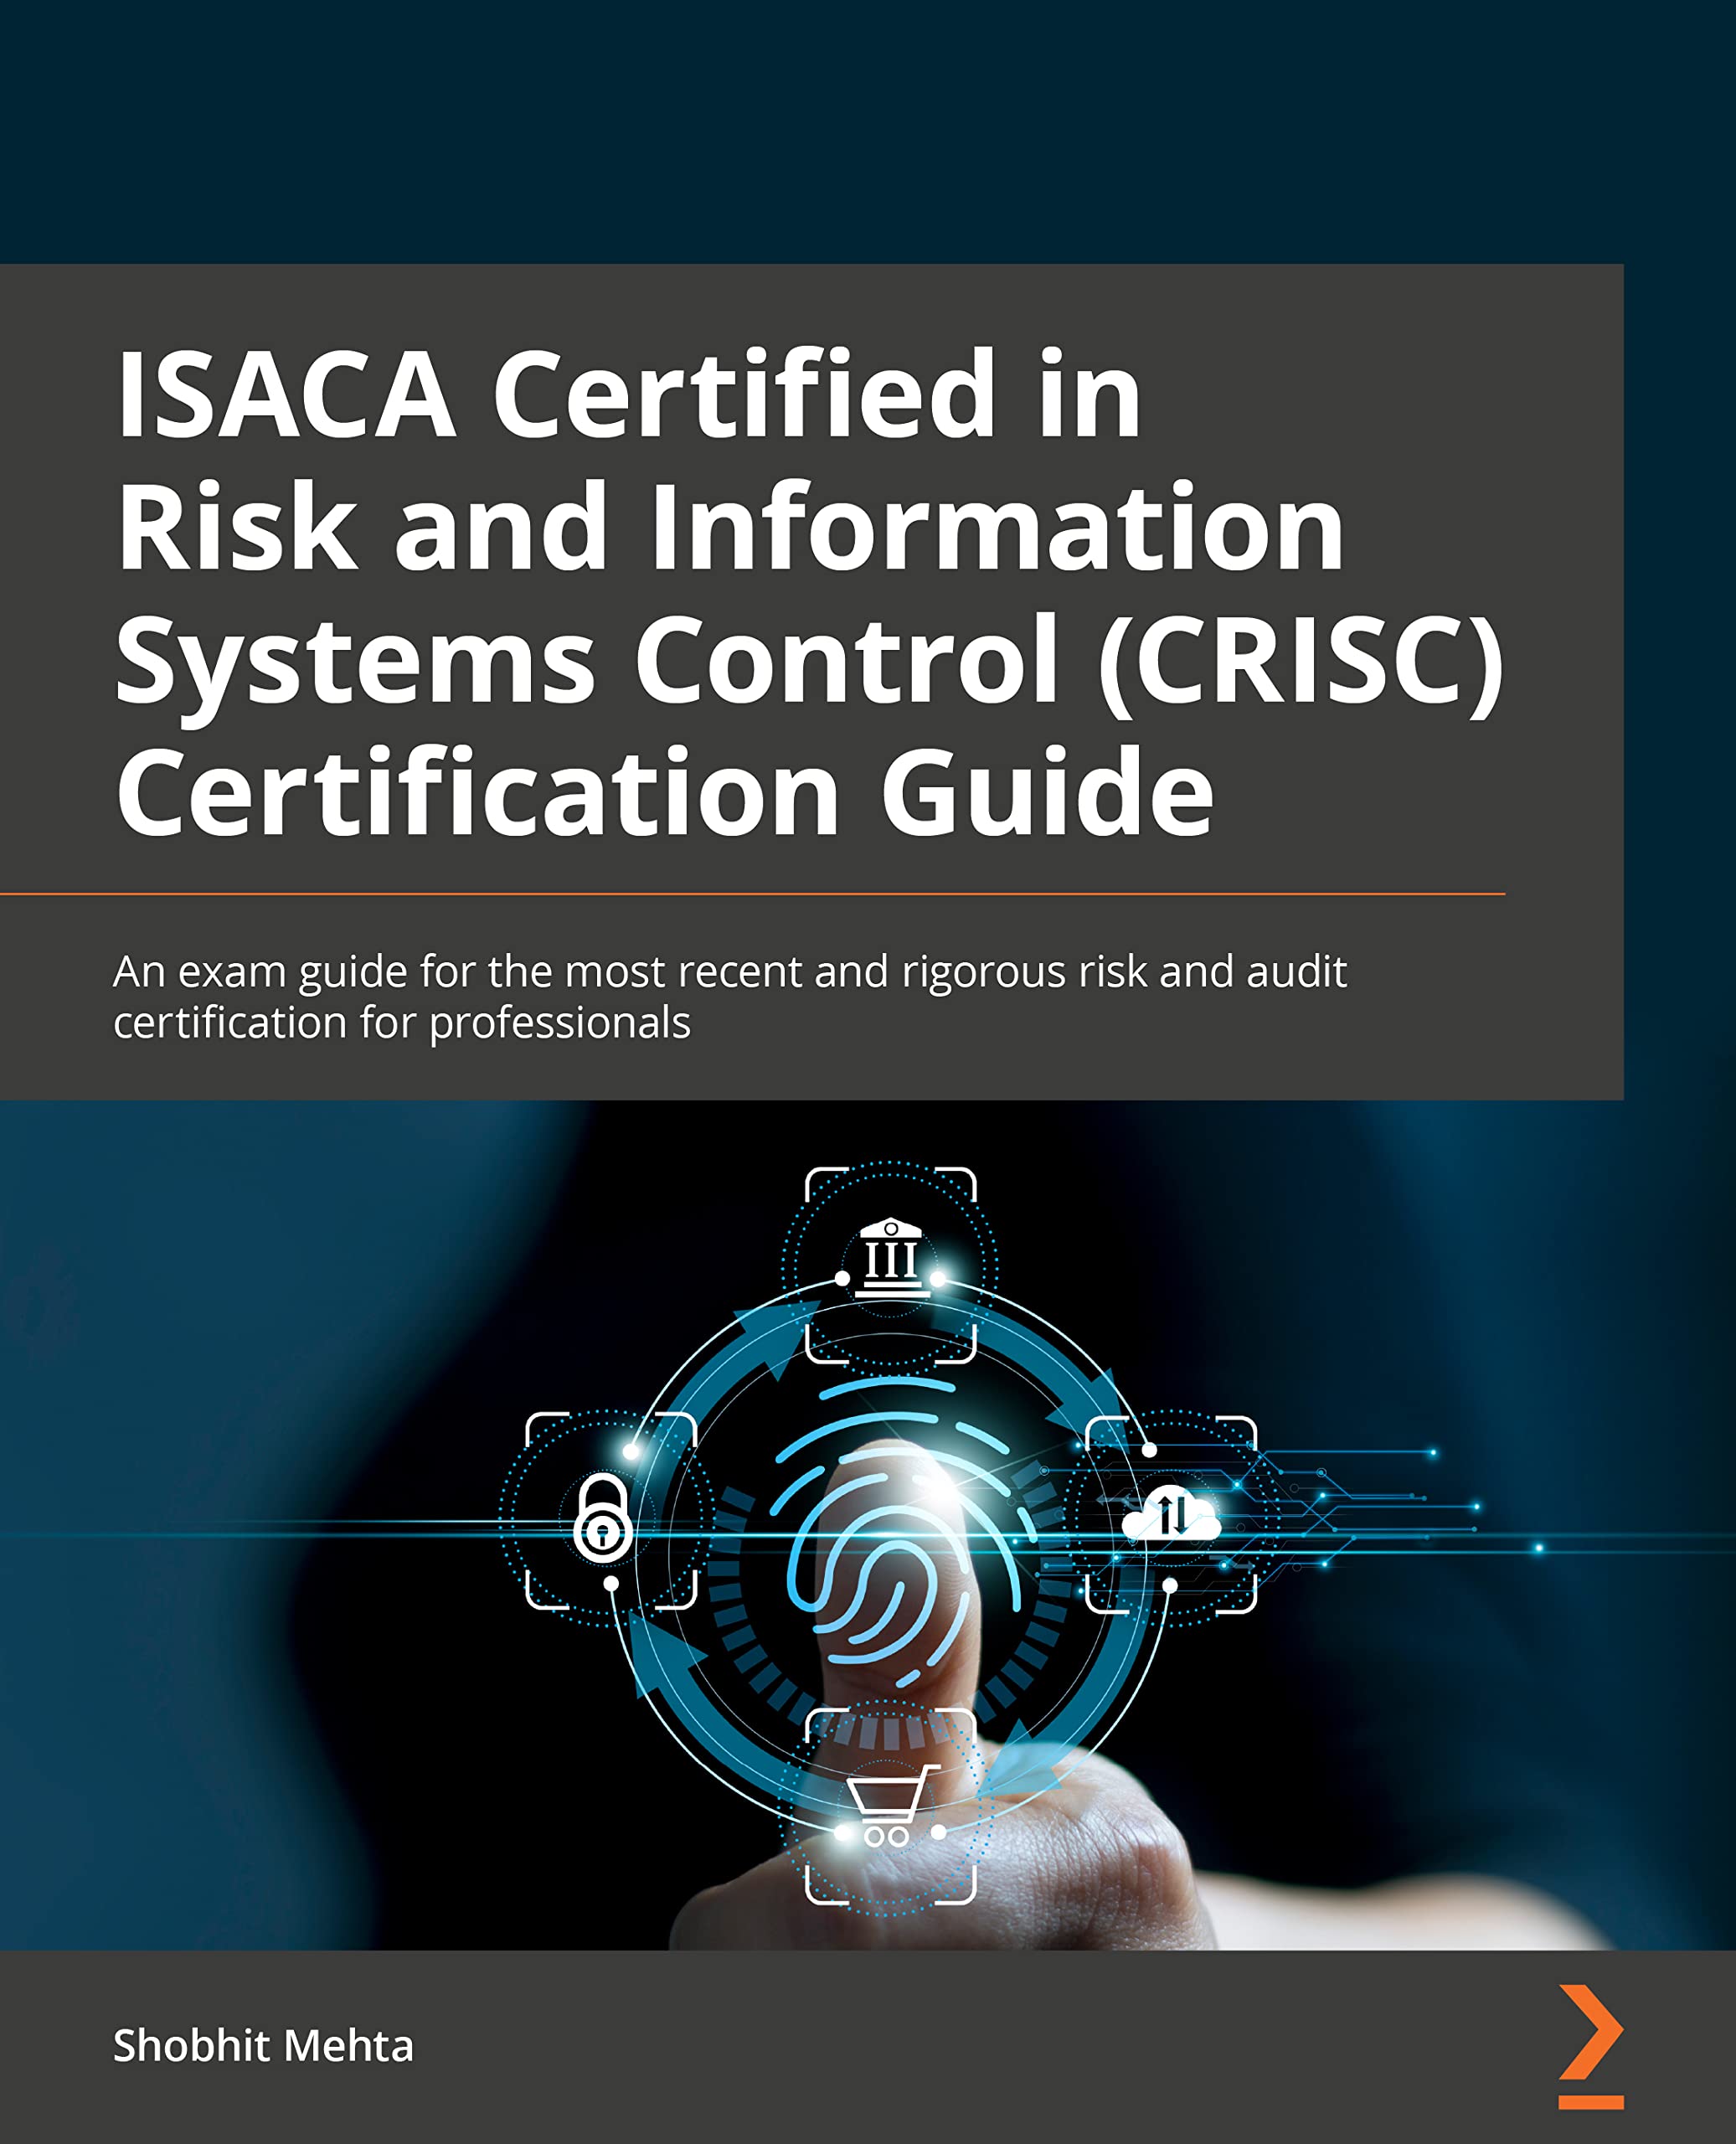 ISACA Certified in Risk and Information Systems Control (CRISC®) Exam Guide: A primer on GRC and an exam guide for the most recent and rigorous IT risk certification